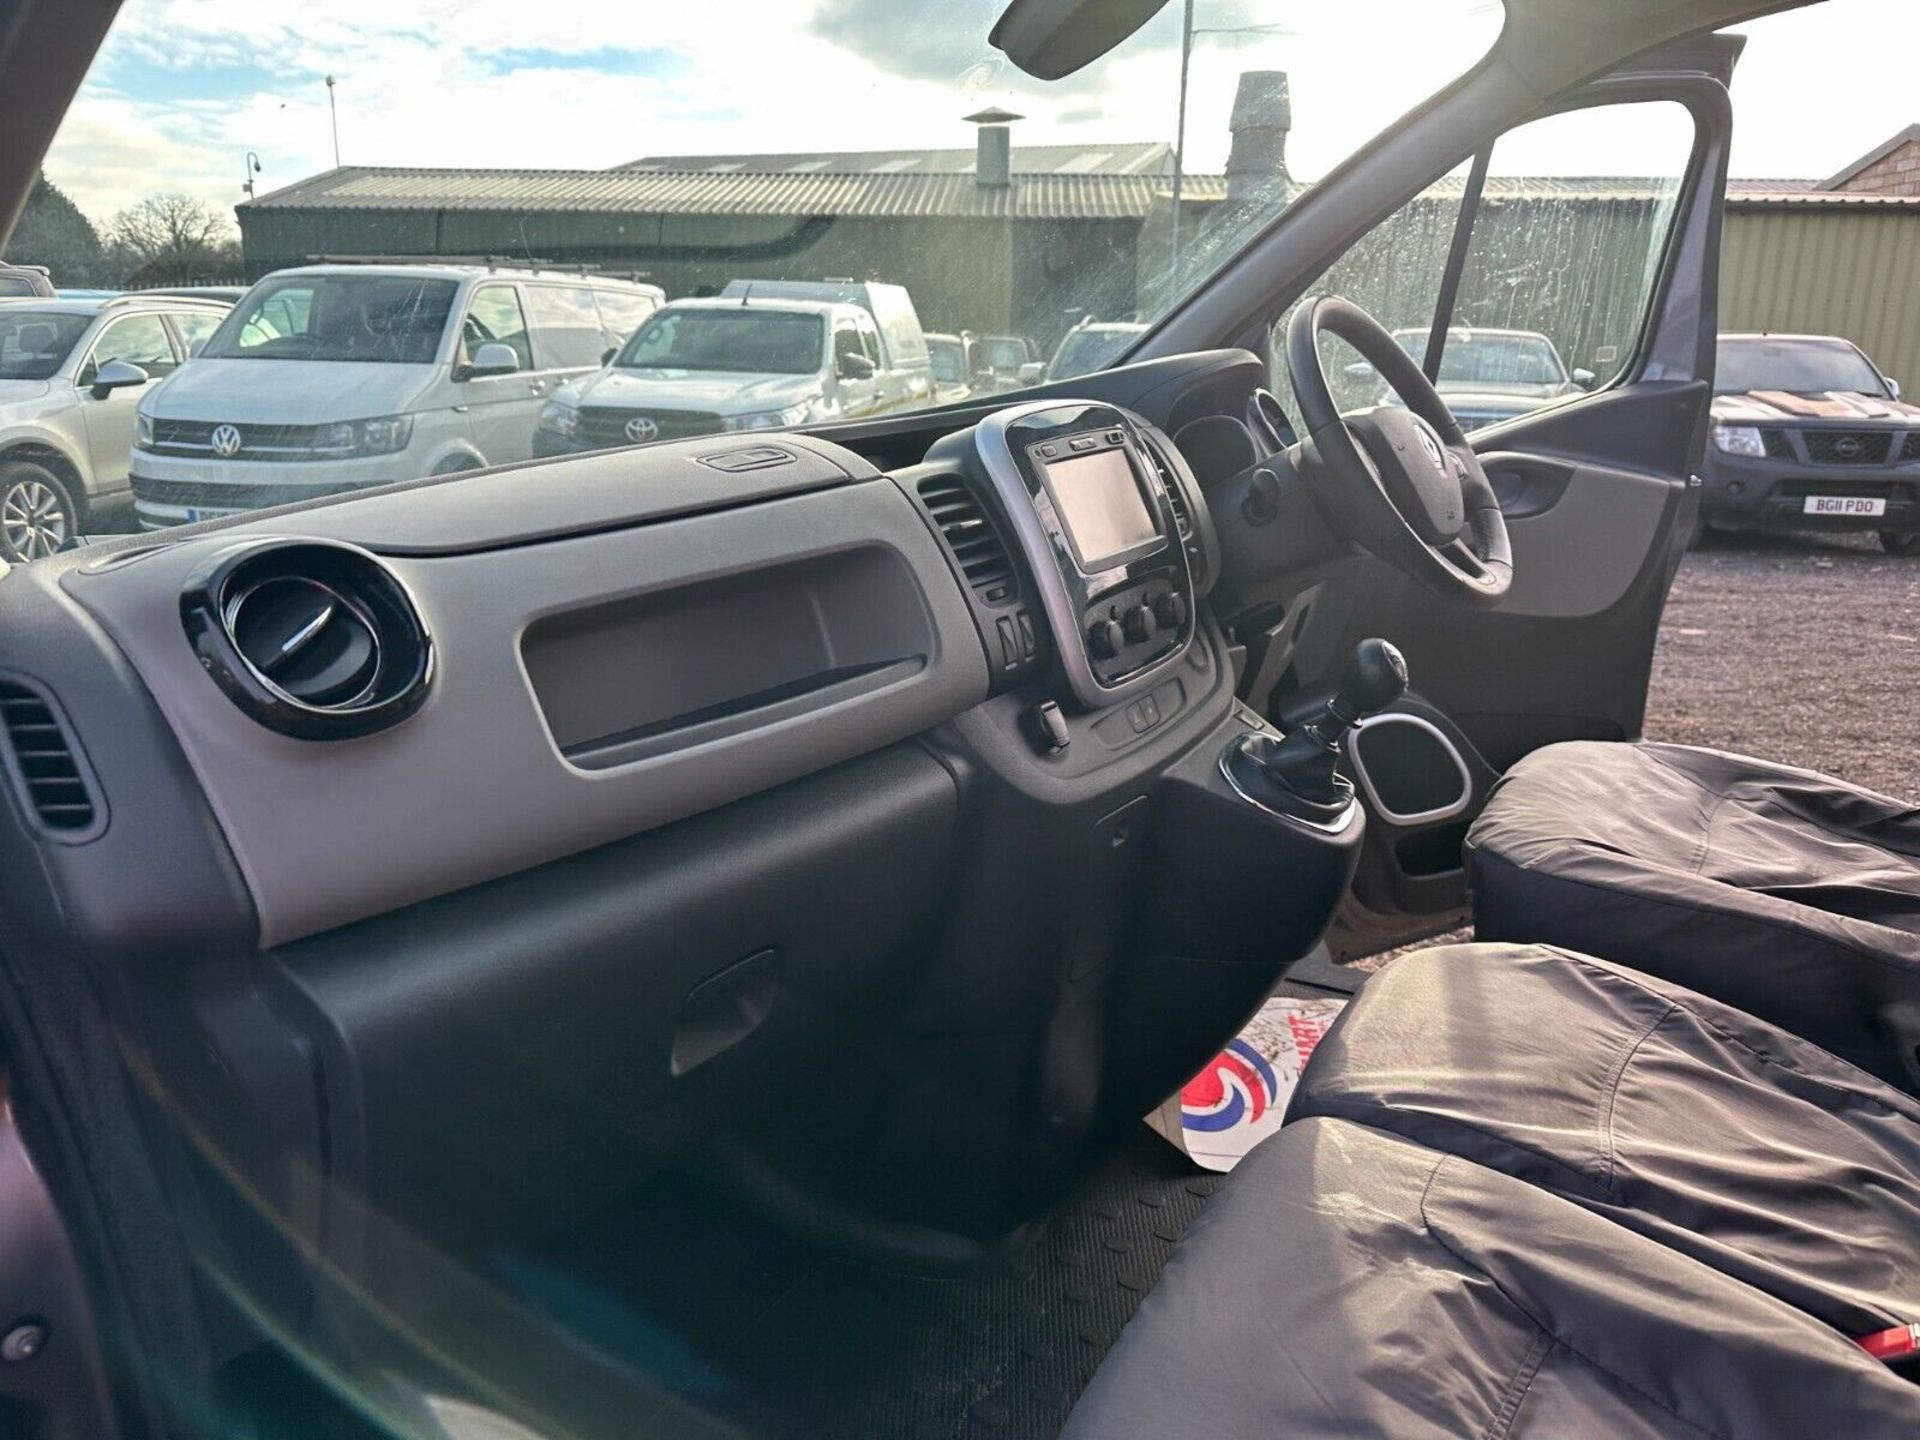 >>--NO VAT ON HAMMER--<< RENAULT TRAFIC REVIVAL: CLEAN BODY, INTERIOR - REPAIR OPPORTUNITY - Image 2 of 16